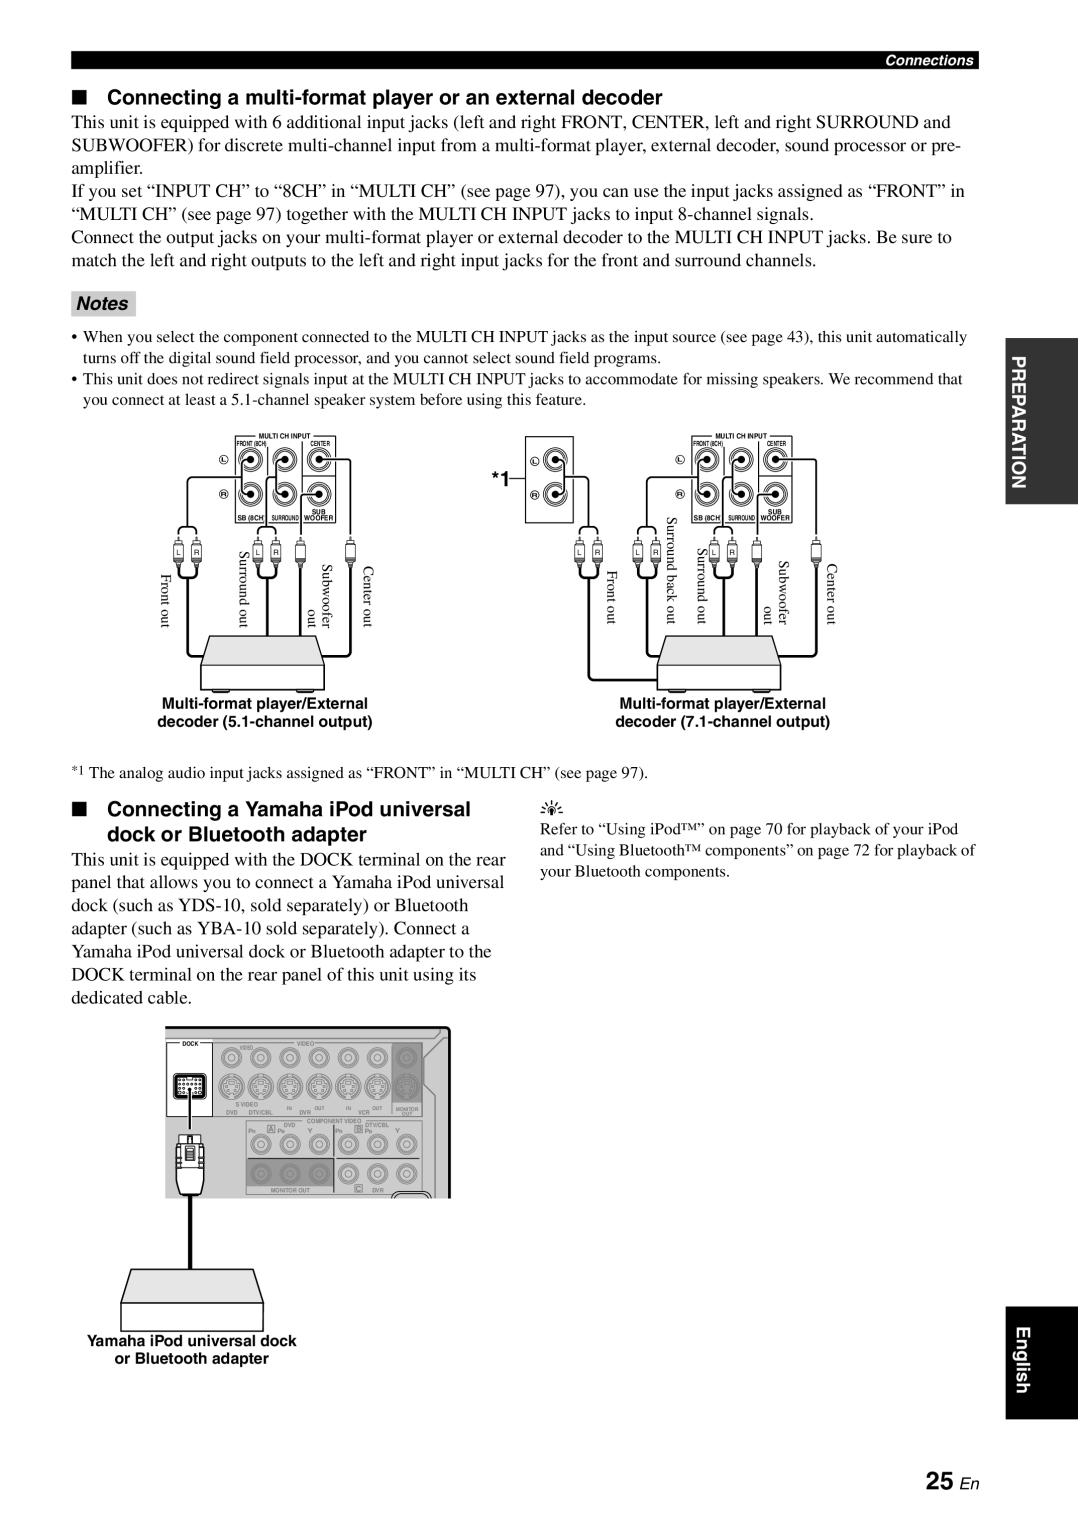 Yamaha HTR-6180 owner manual 25 En, Connecting a Yamaha iPod universal, dock or Bluetooth adapter, Notes 